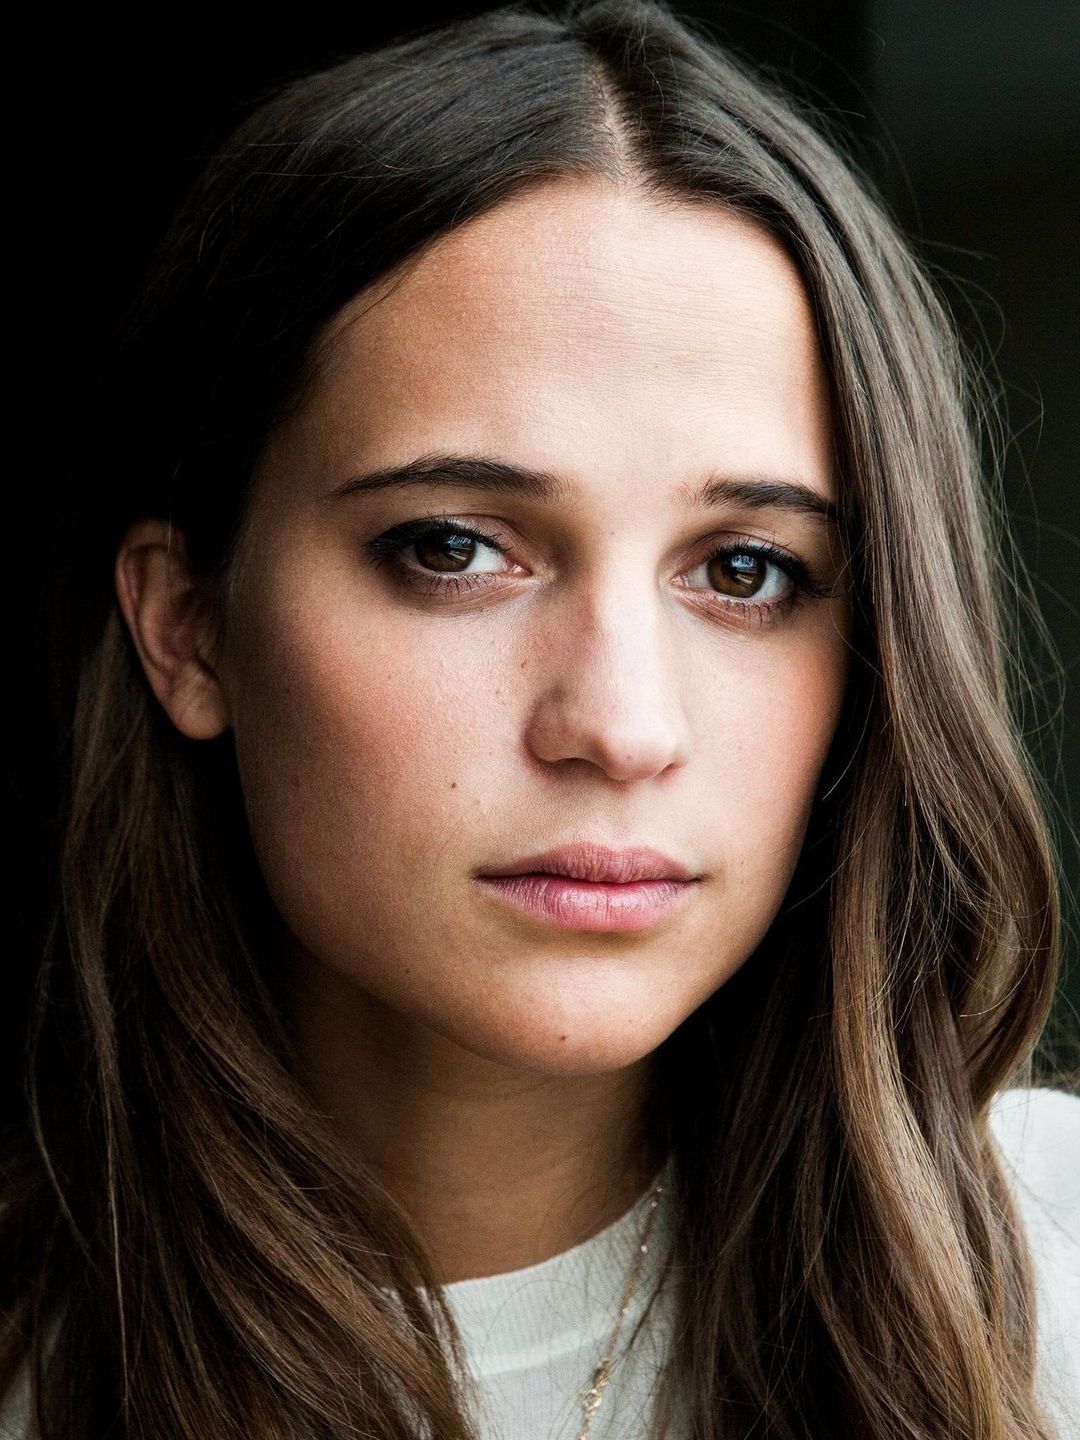 Alicia Vikander who are her parents